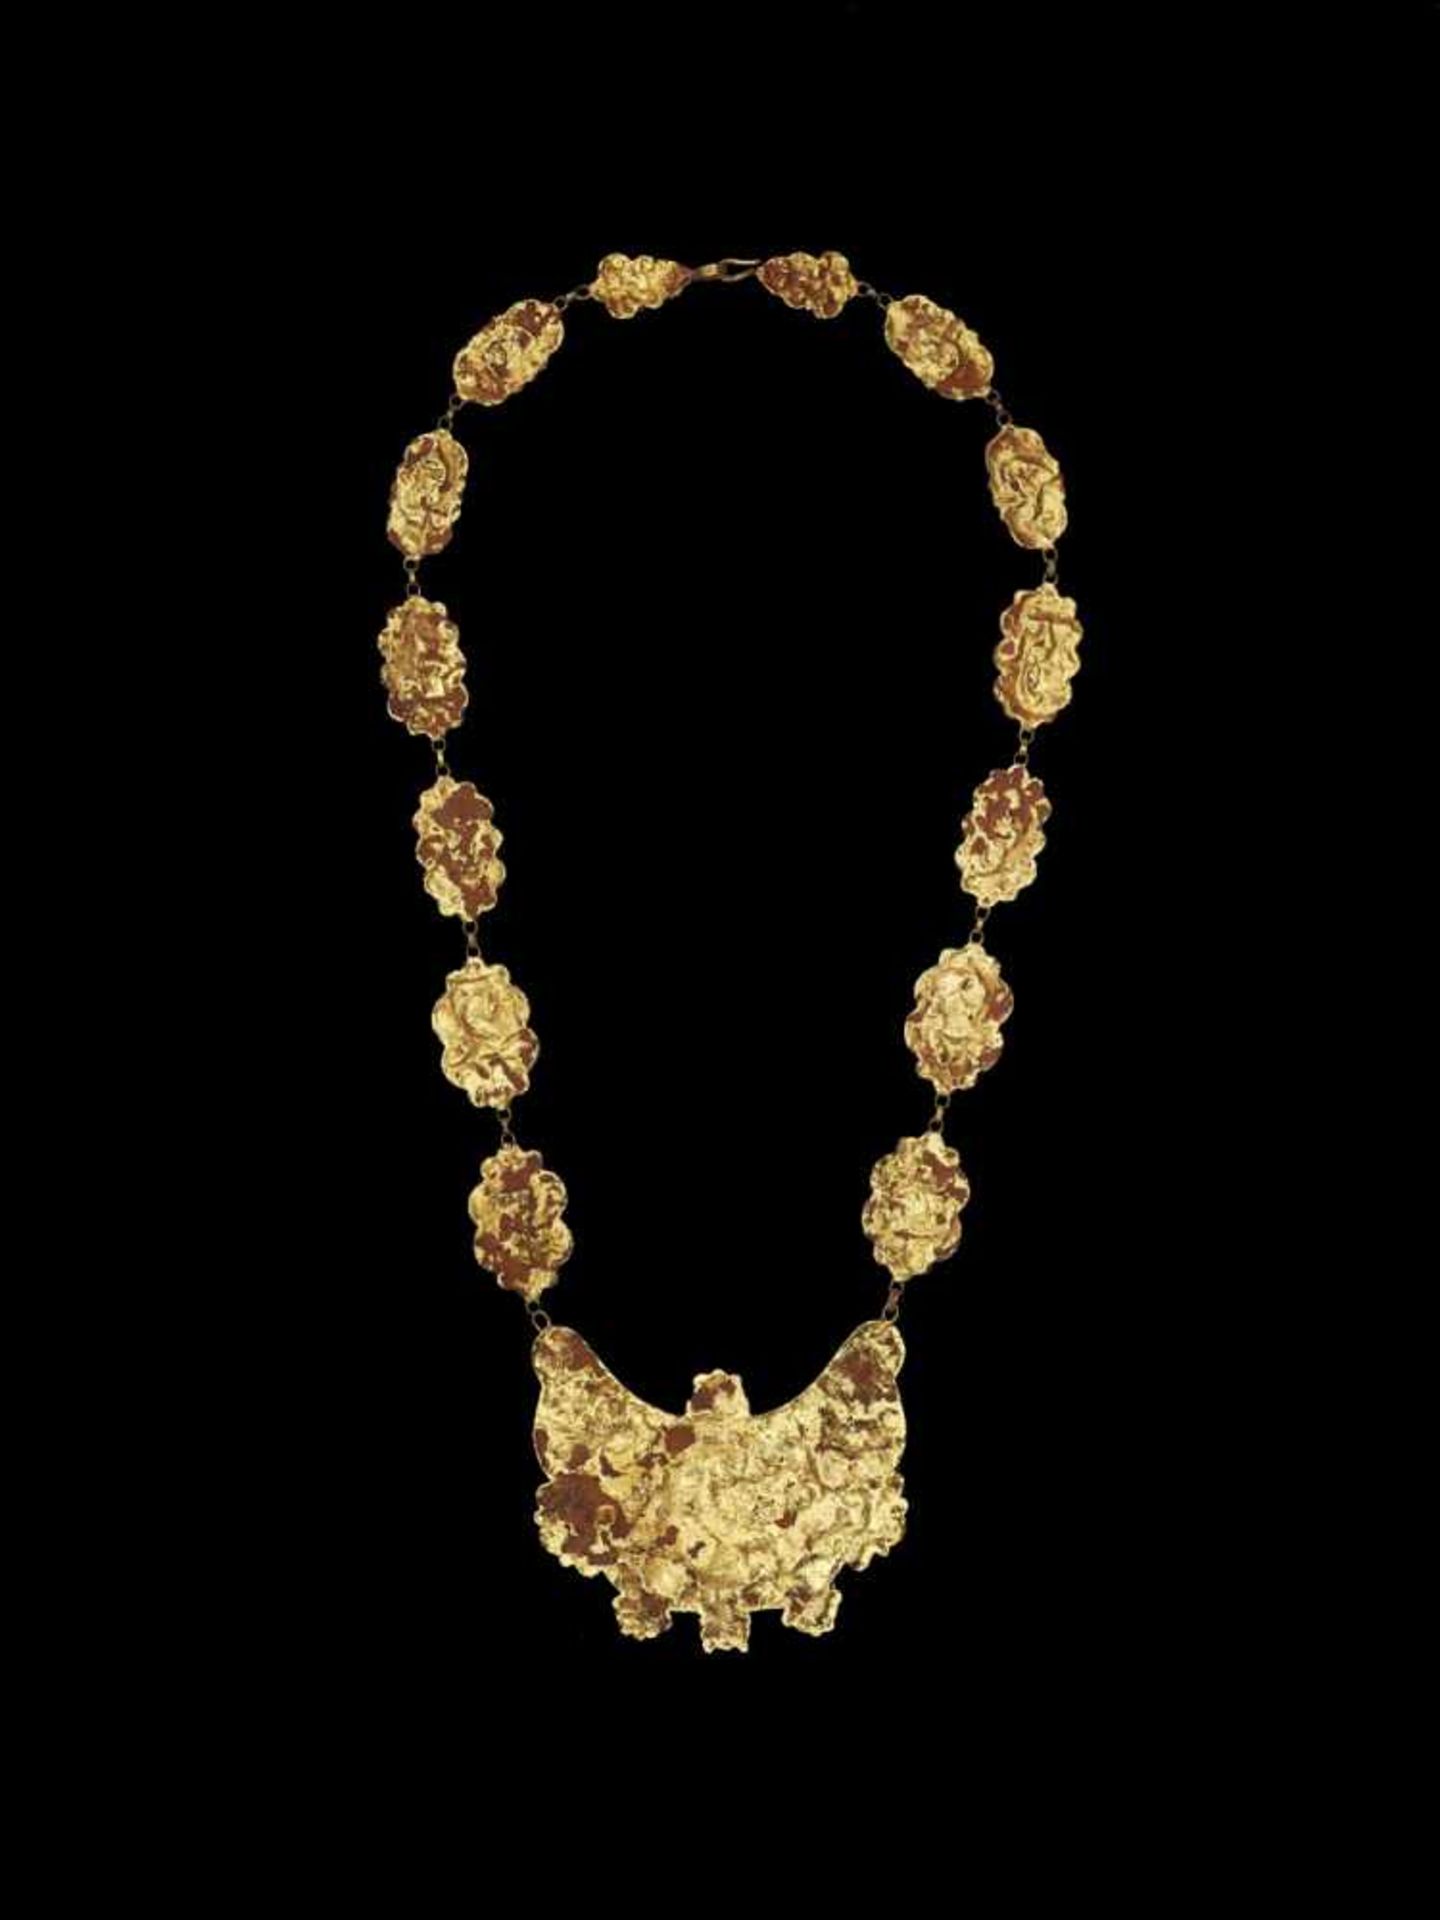 A CHAM REPOUSSÉ GOLD NECKLACE WITH A PECTORAL DEPICTING KALA Central Cham kingdom, most probably - Image 4 of 5